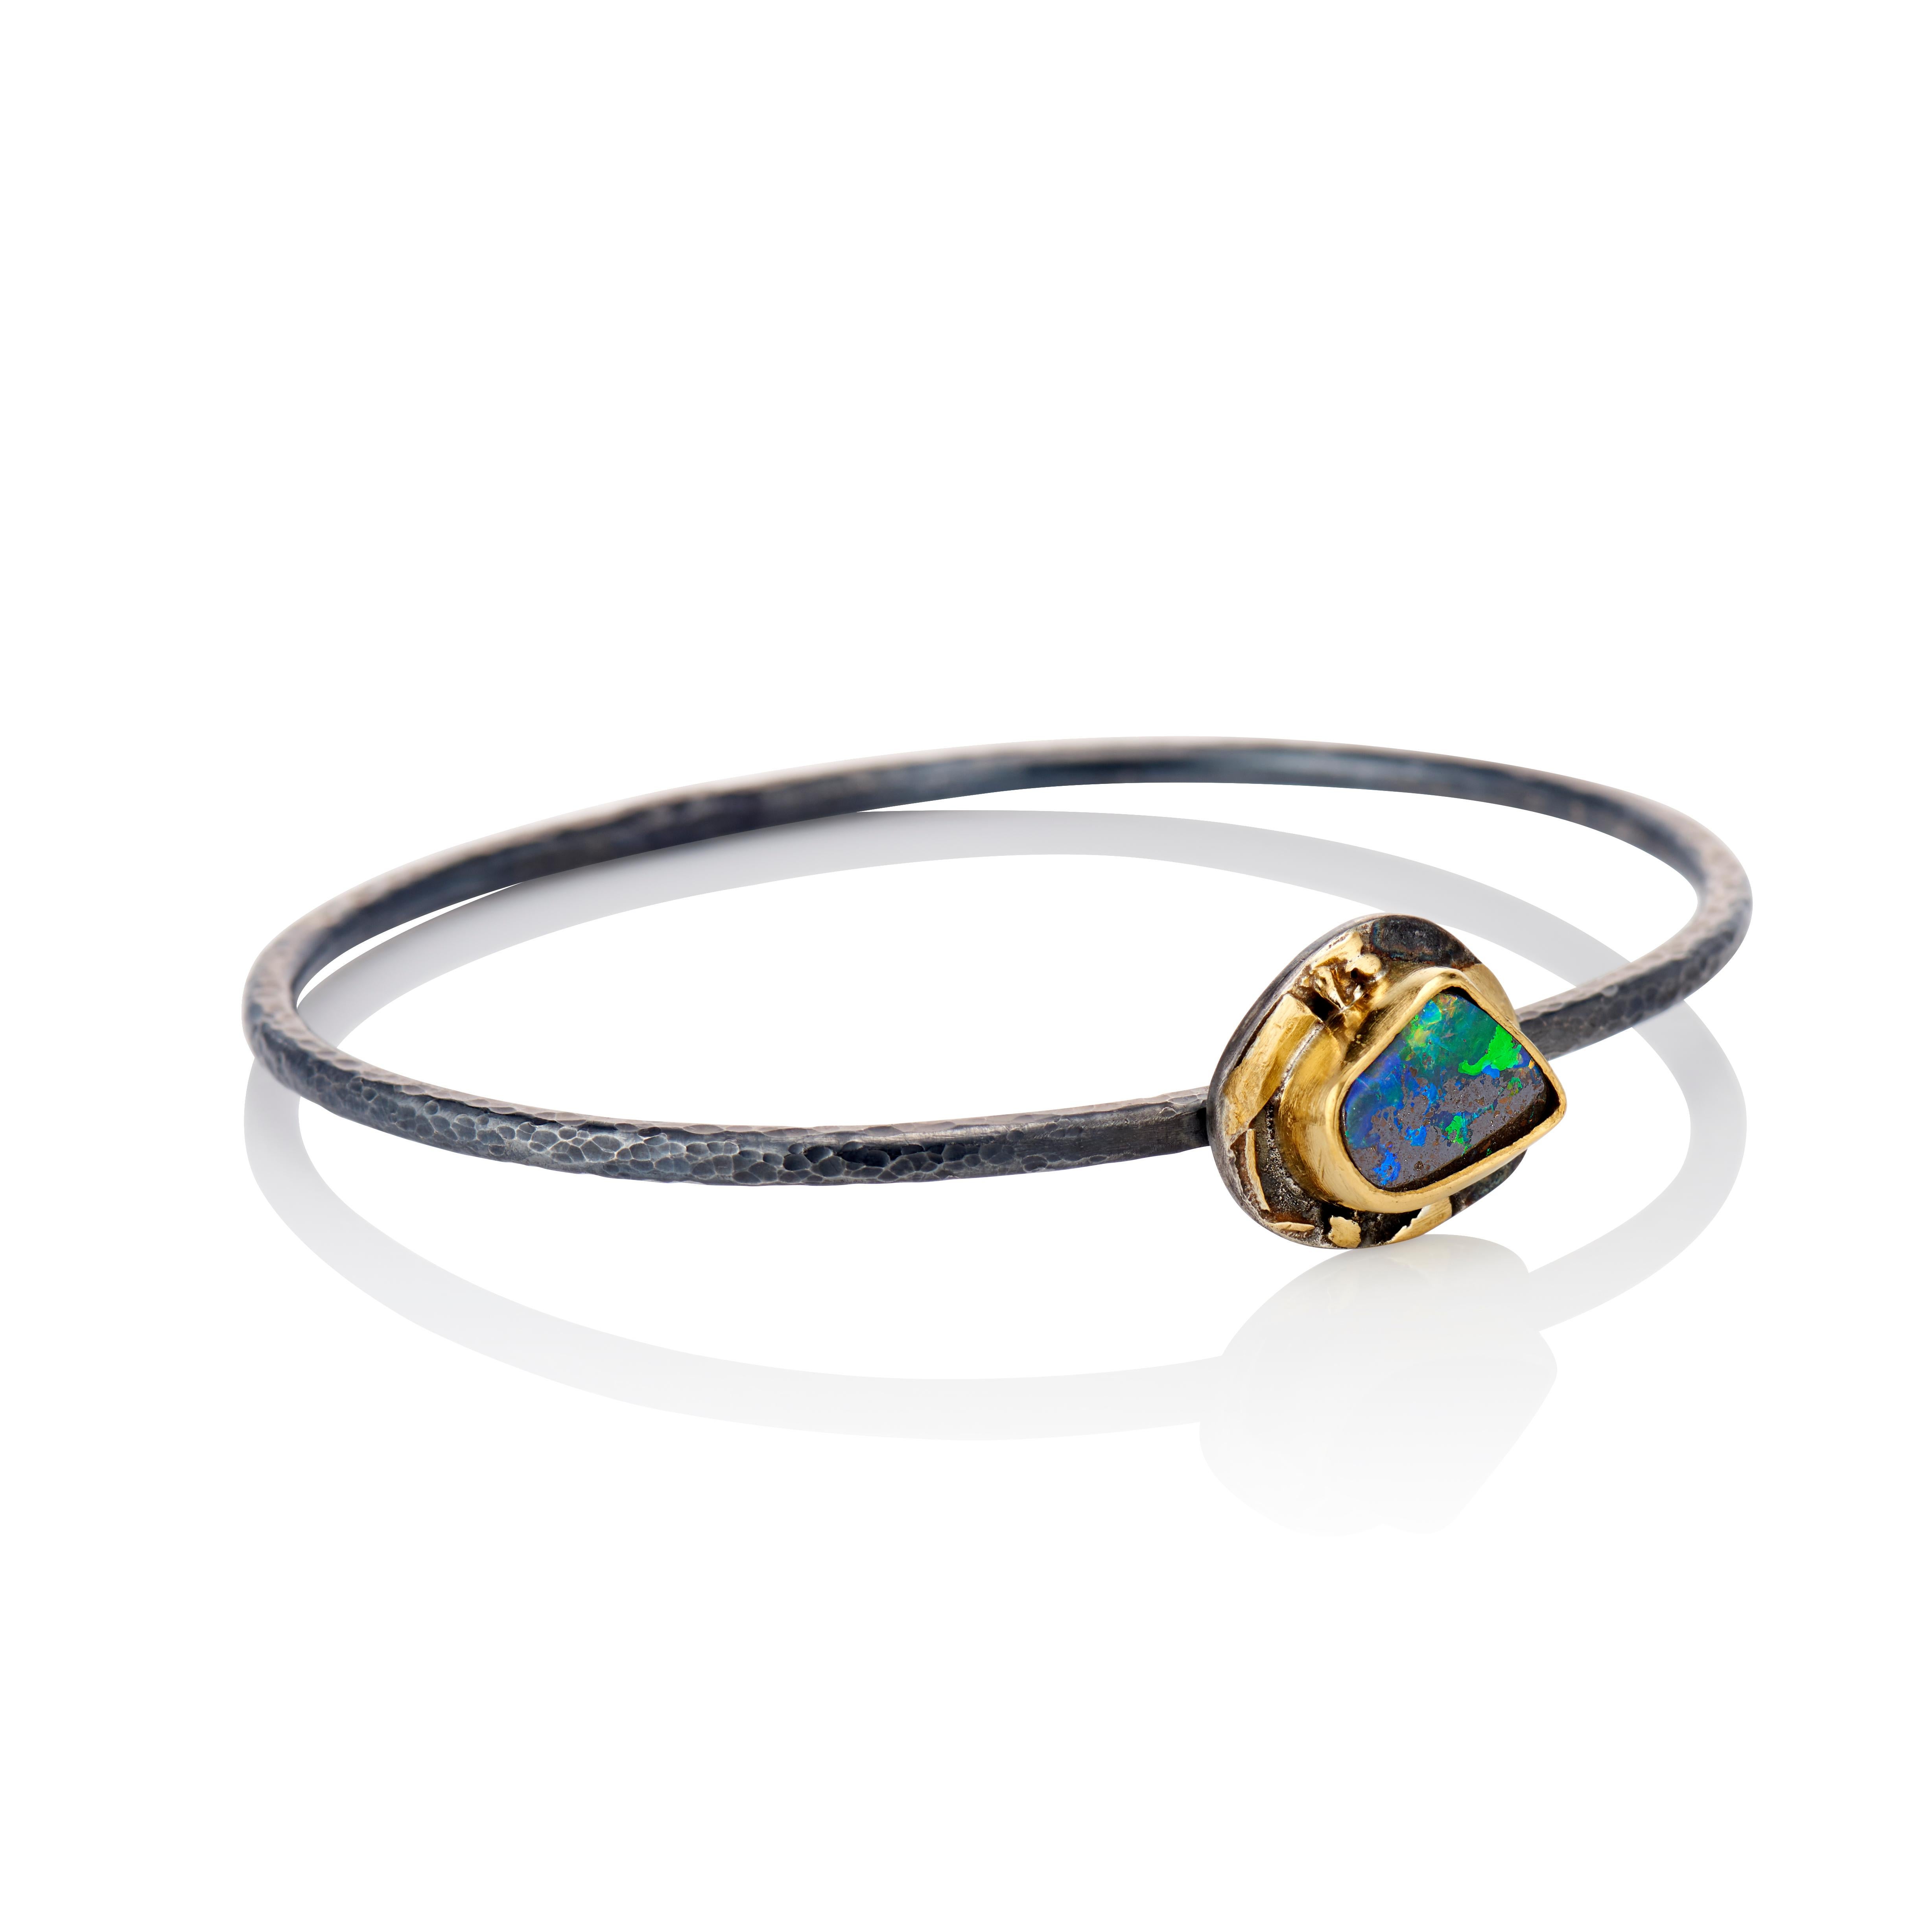 Contemporary Opal Bangle Bracelet Oxidized Sterling Silver 22 Karat Yellow Gold In New Condition For Sale In New York, NY